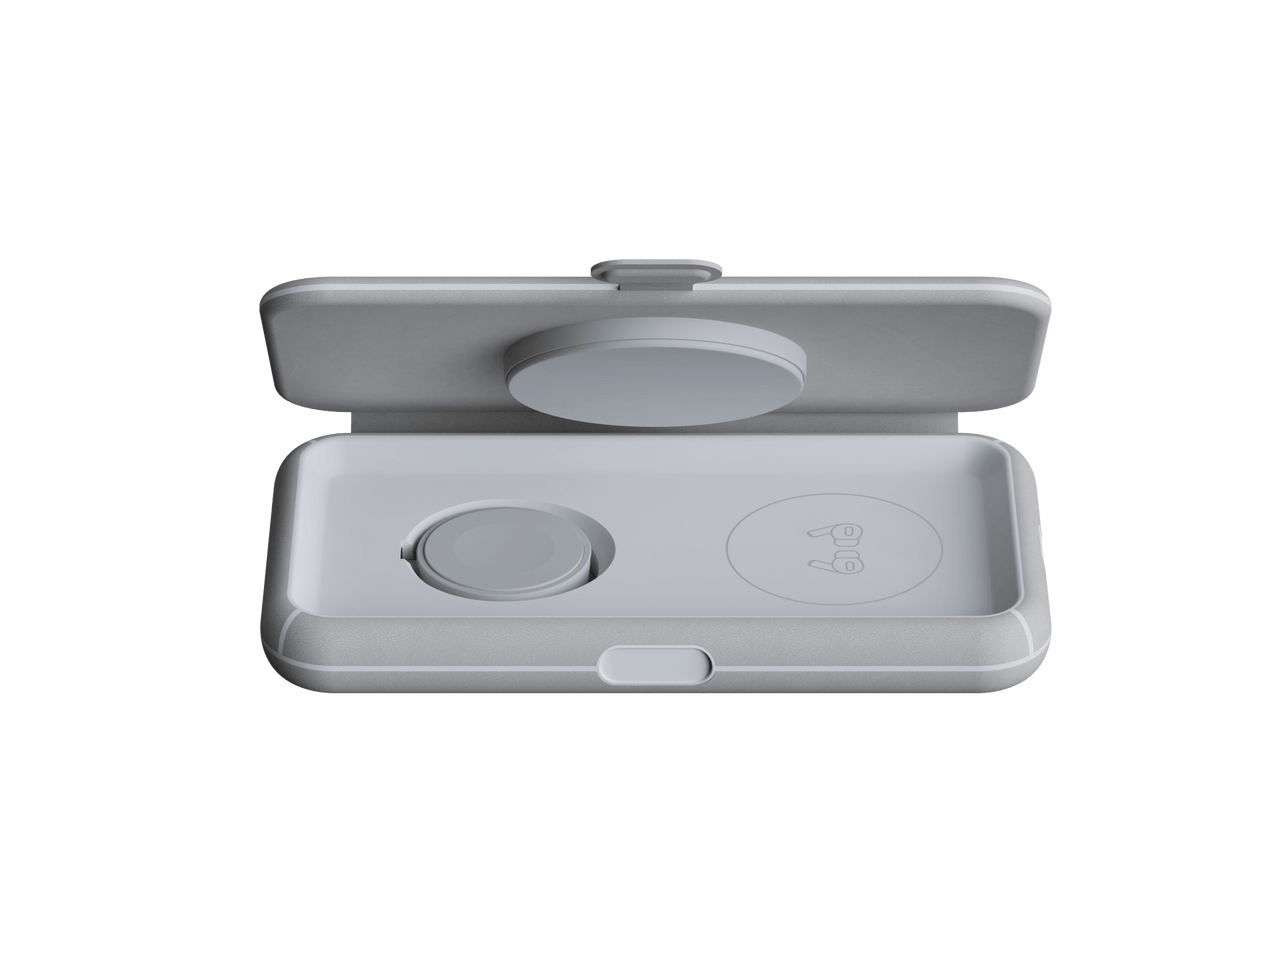 Foldable Wireless Travel Charger 3in1 - Xtorm EU